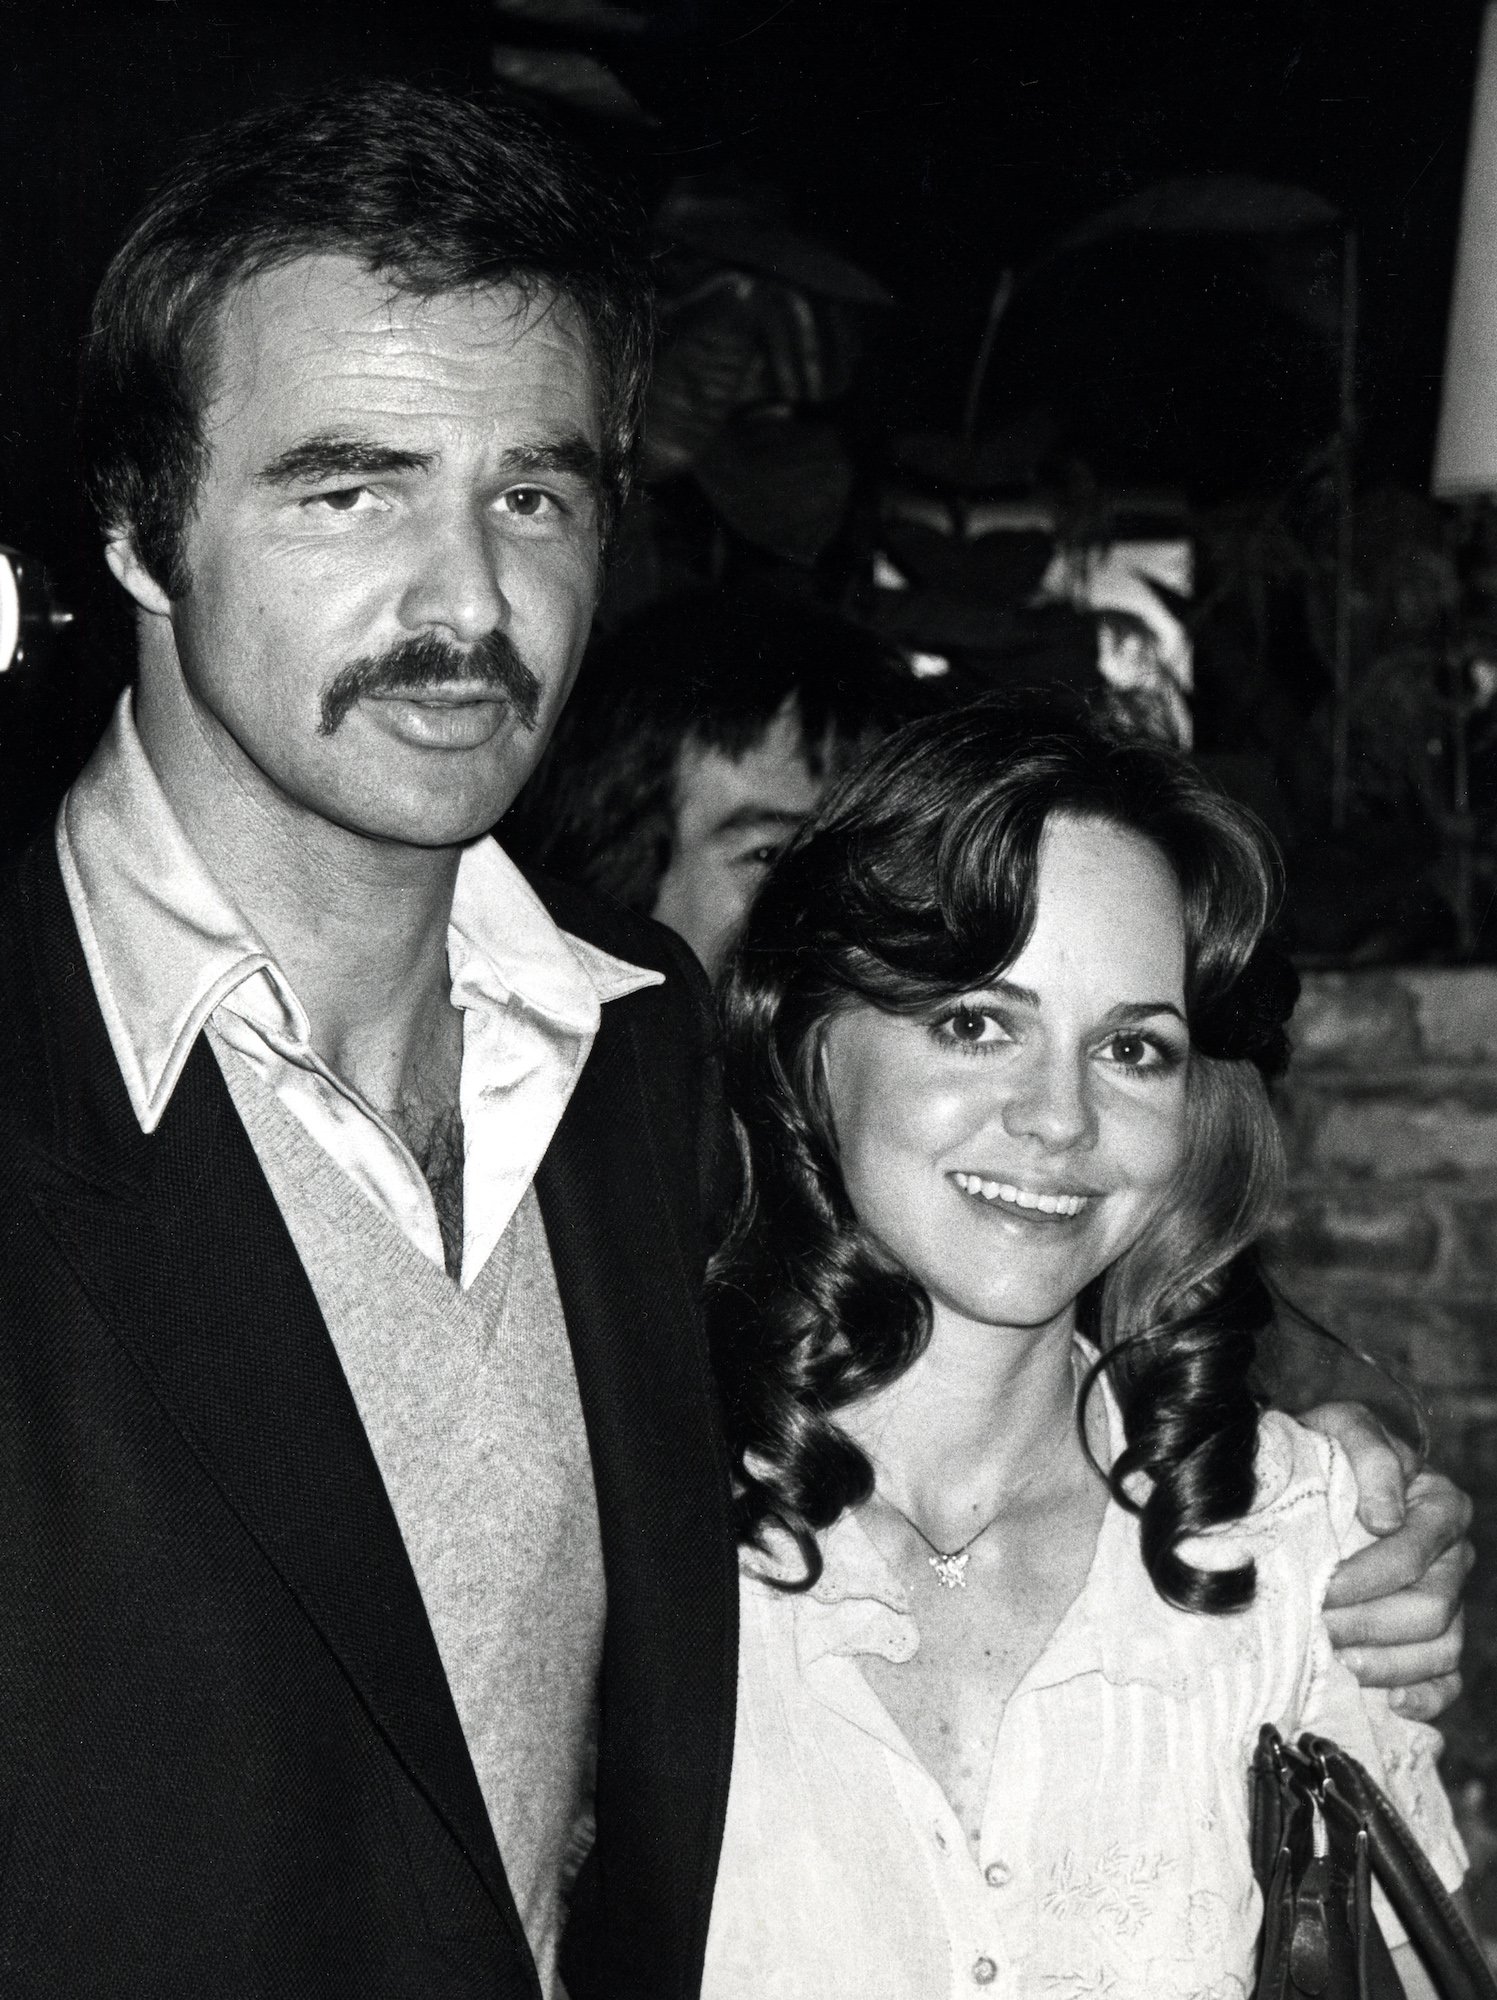 Burt Reynolds and Sally Field posing for a photo at a restaurant in Los Angeles